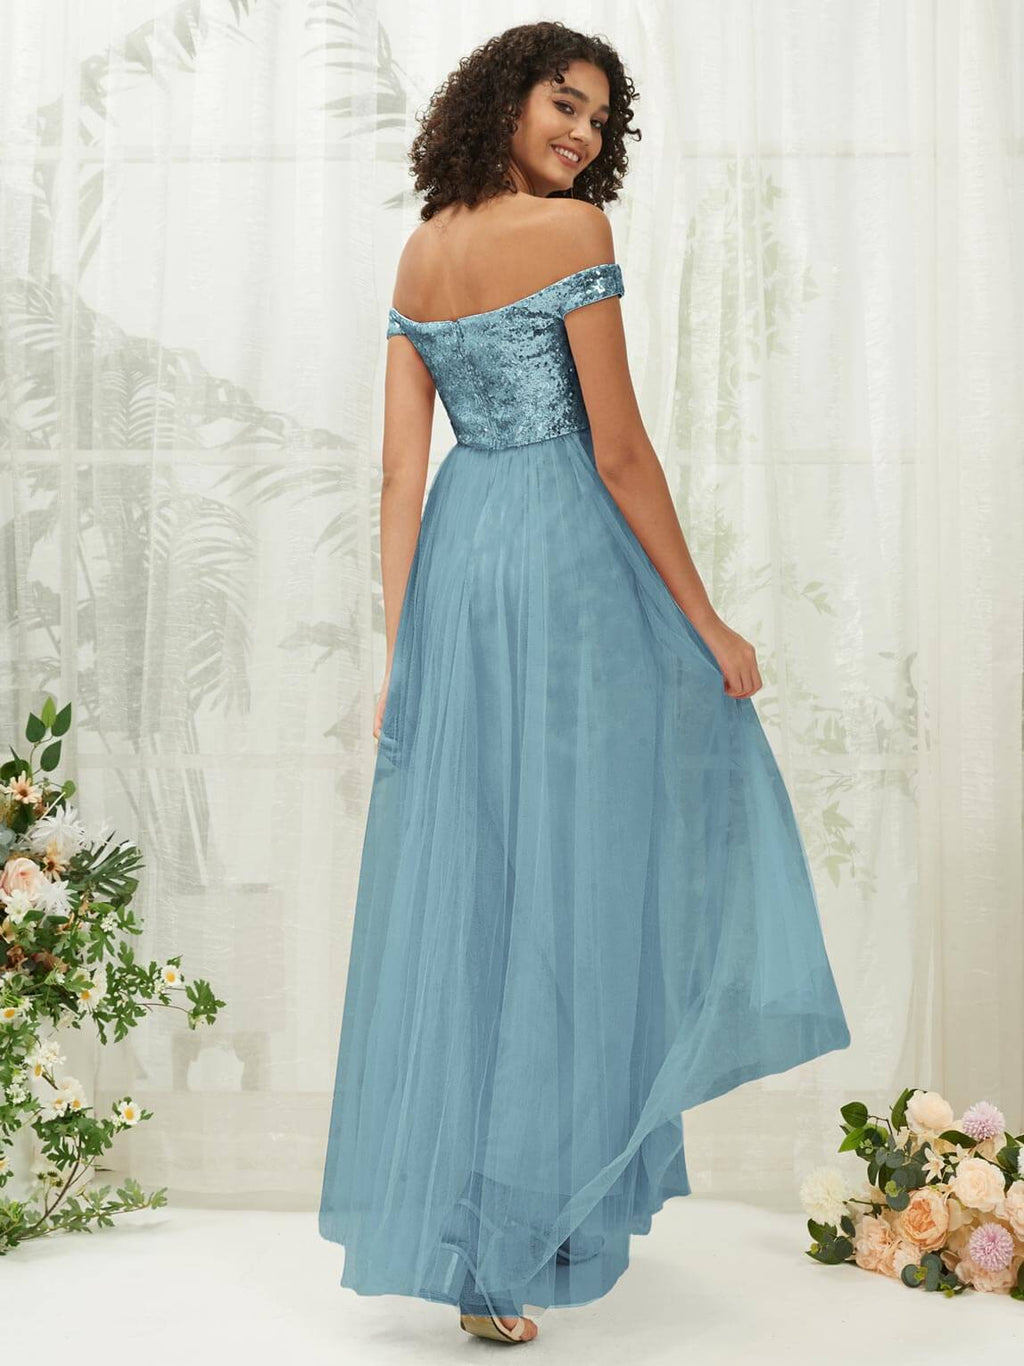 NZ Bridal Moody Blue Sequin Tulle Maxi Flowy Prom Dress 00277ee Esther a